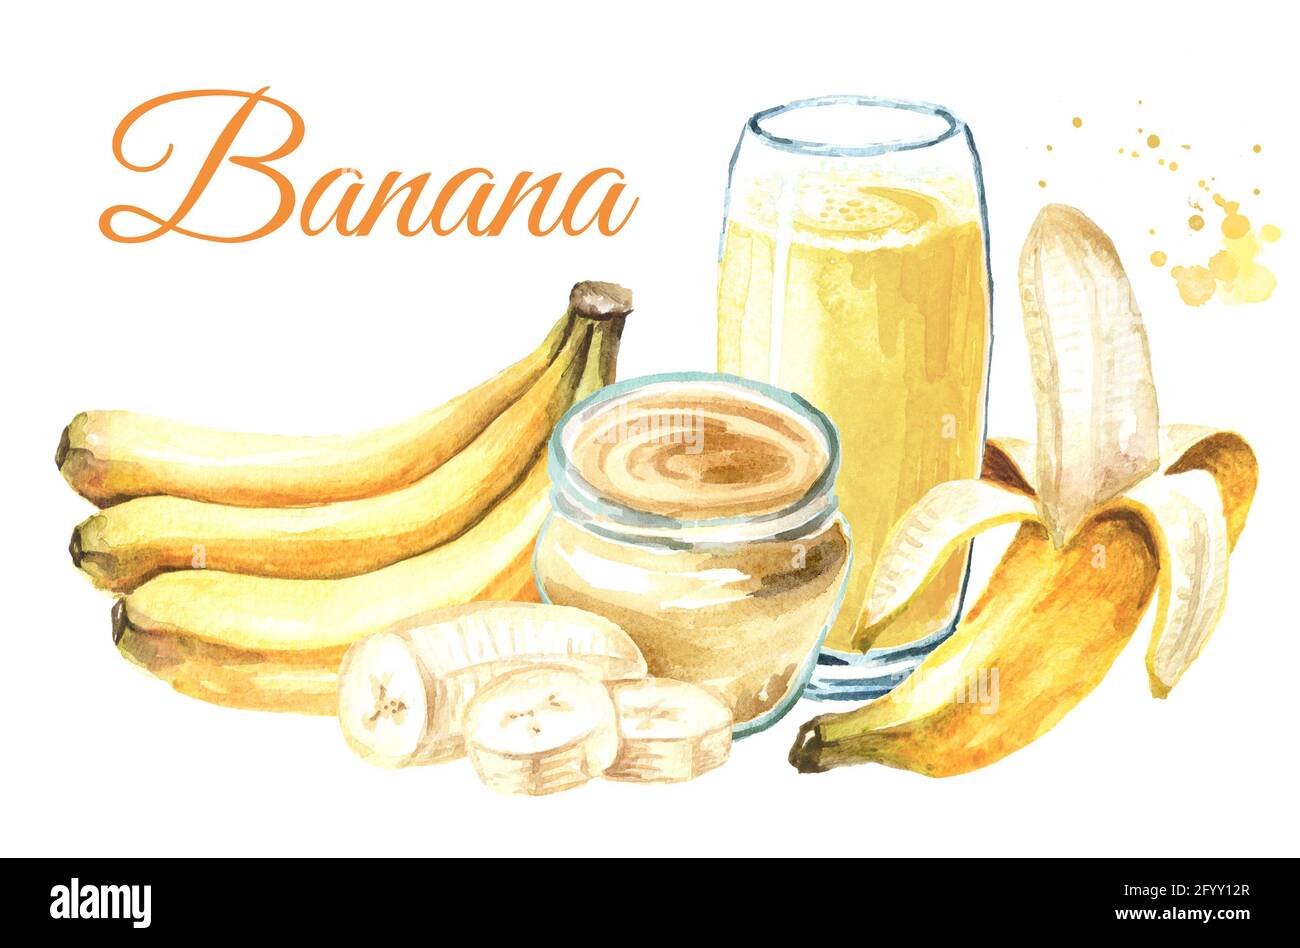 Banana card. Watercolor hand drawn illustration, isolated on white background Stock Photo